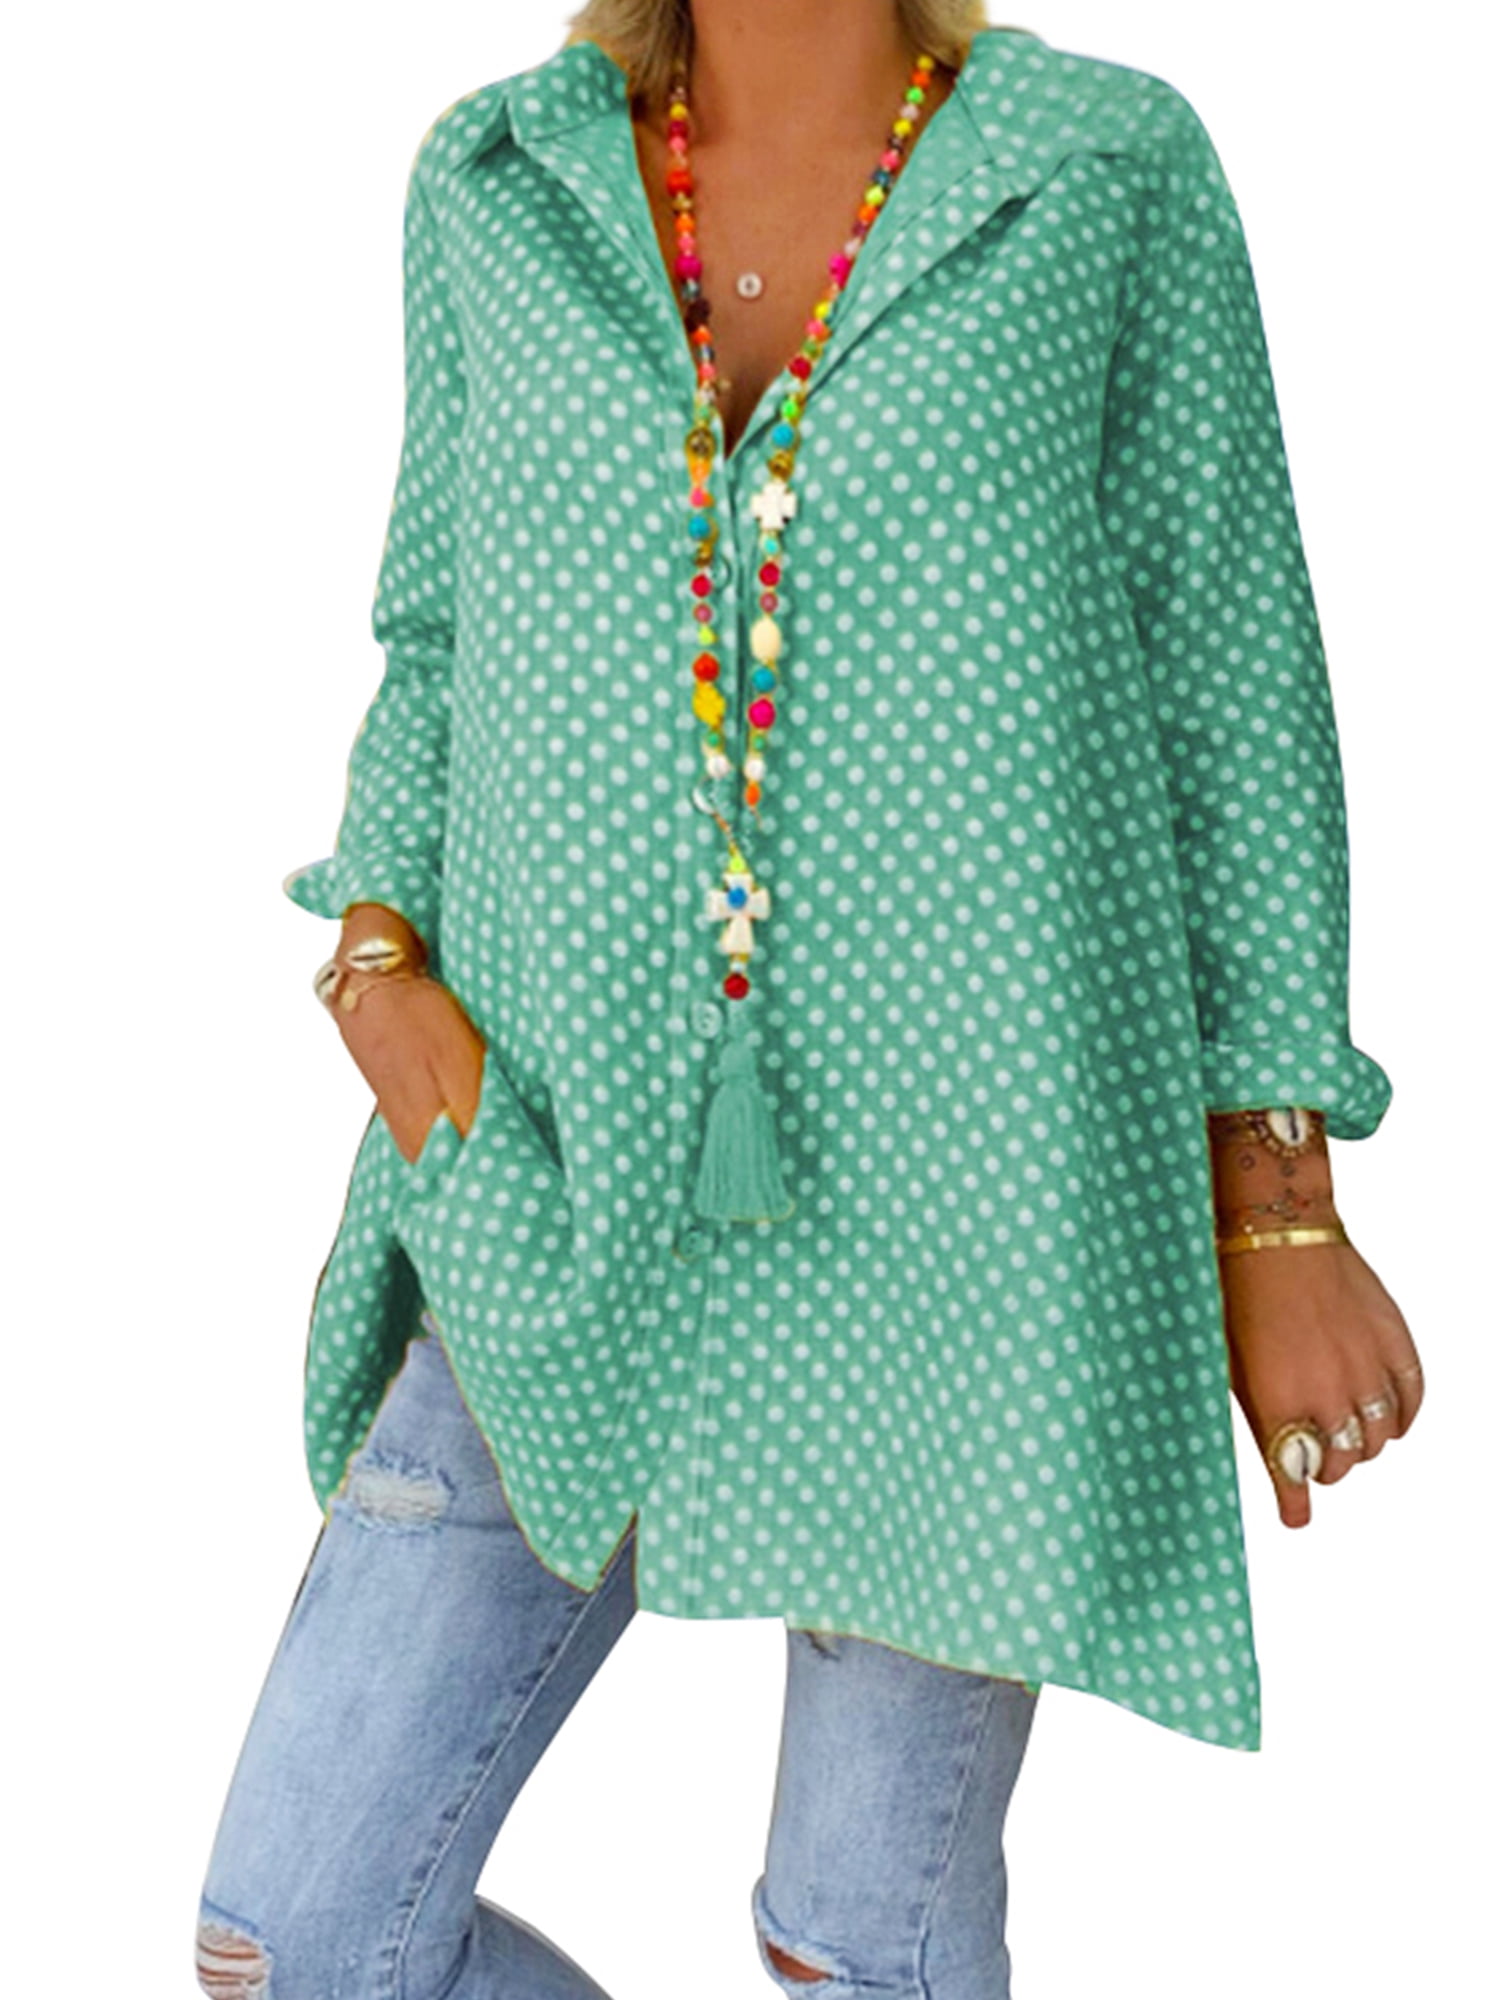 Plus Size Tunic Blouse for Women Roll Up Sleeve Casual Polka Dot Shirt ...